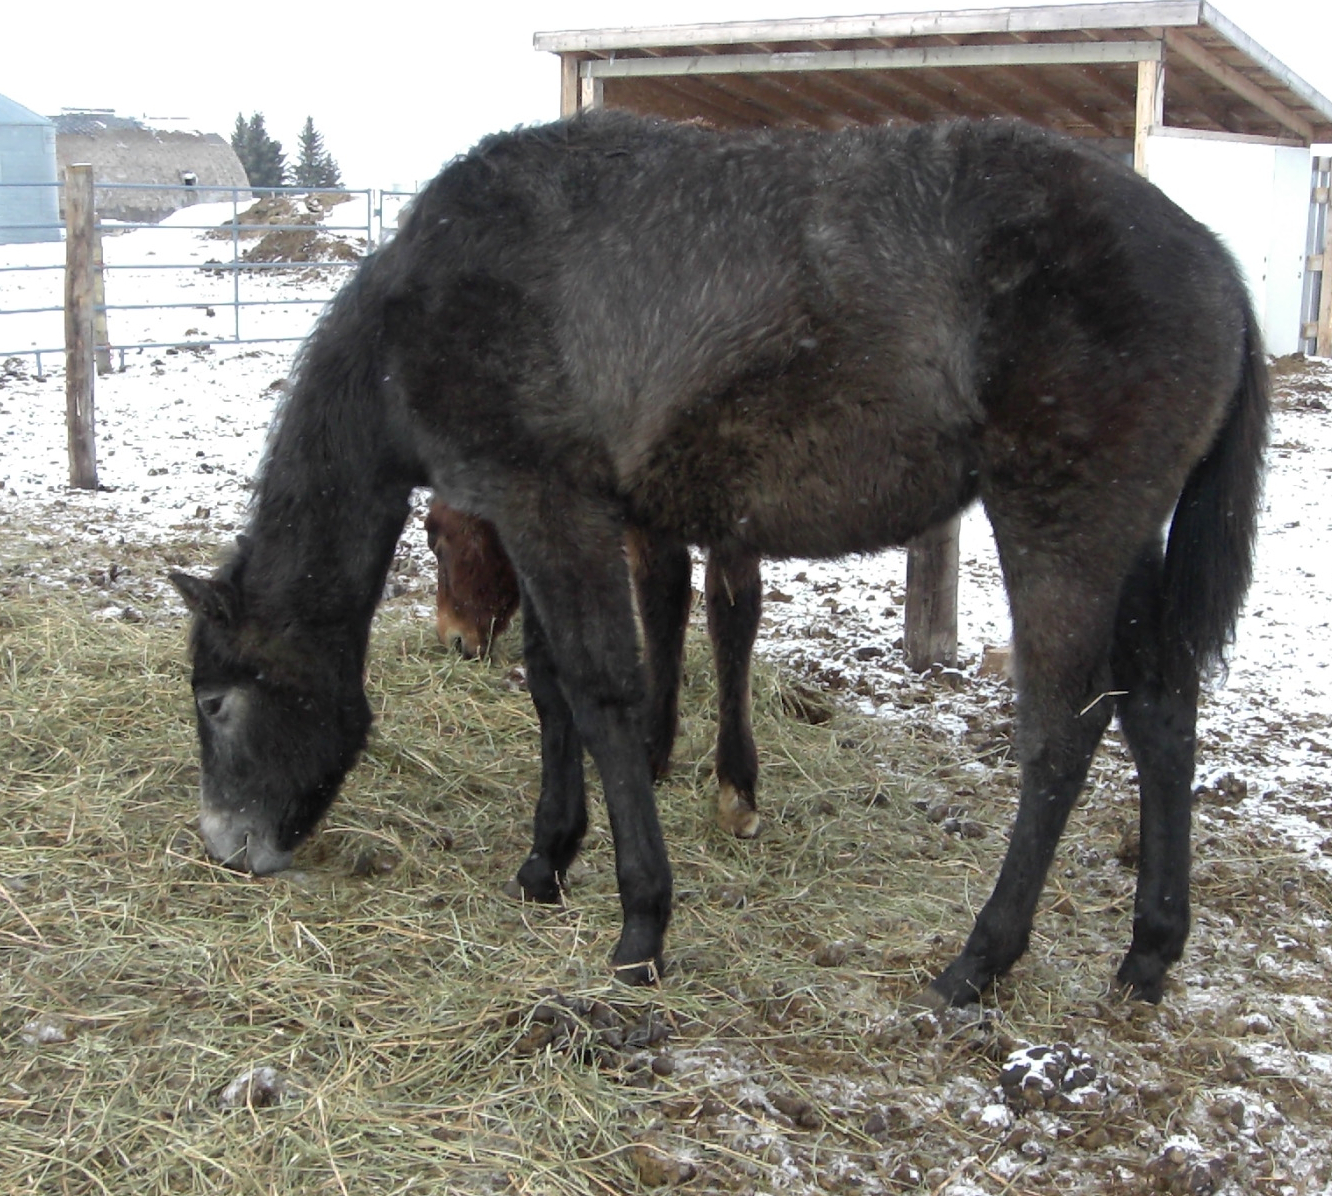 TIANA - Mar. 8/14 - While running with her herdmates, she slipped on the ice and slid into a feeder, she damaged her front leg beyond repair, we couldn't save her.